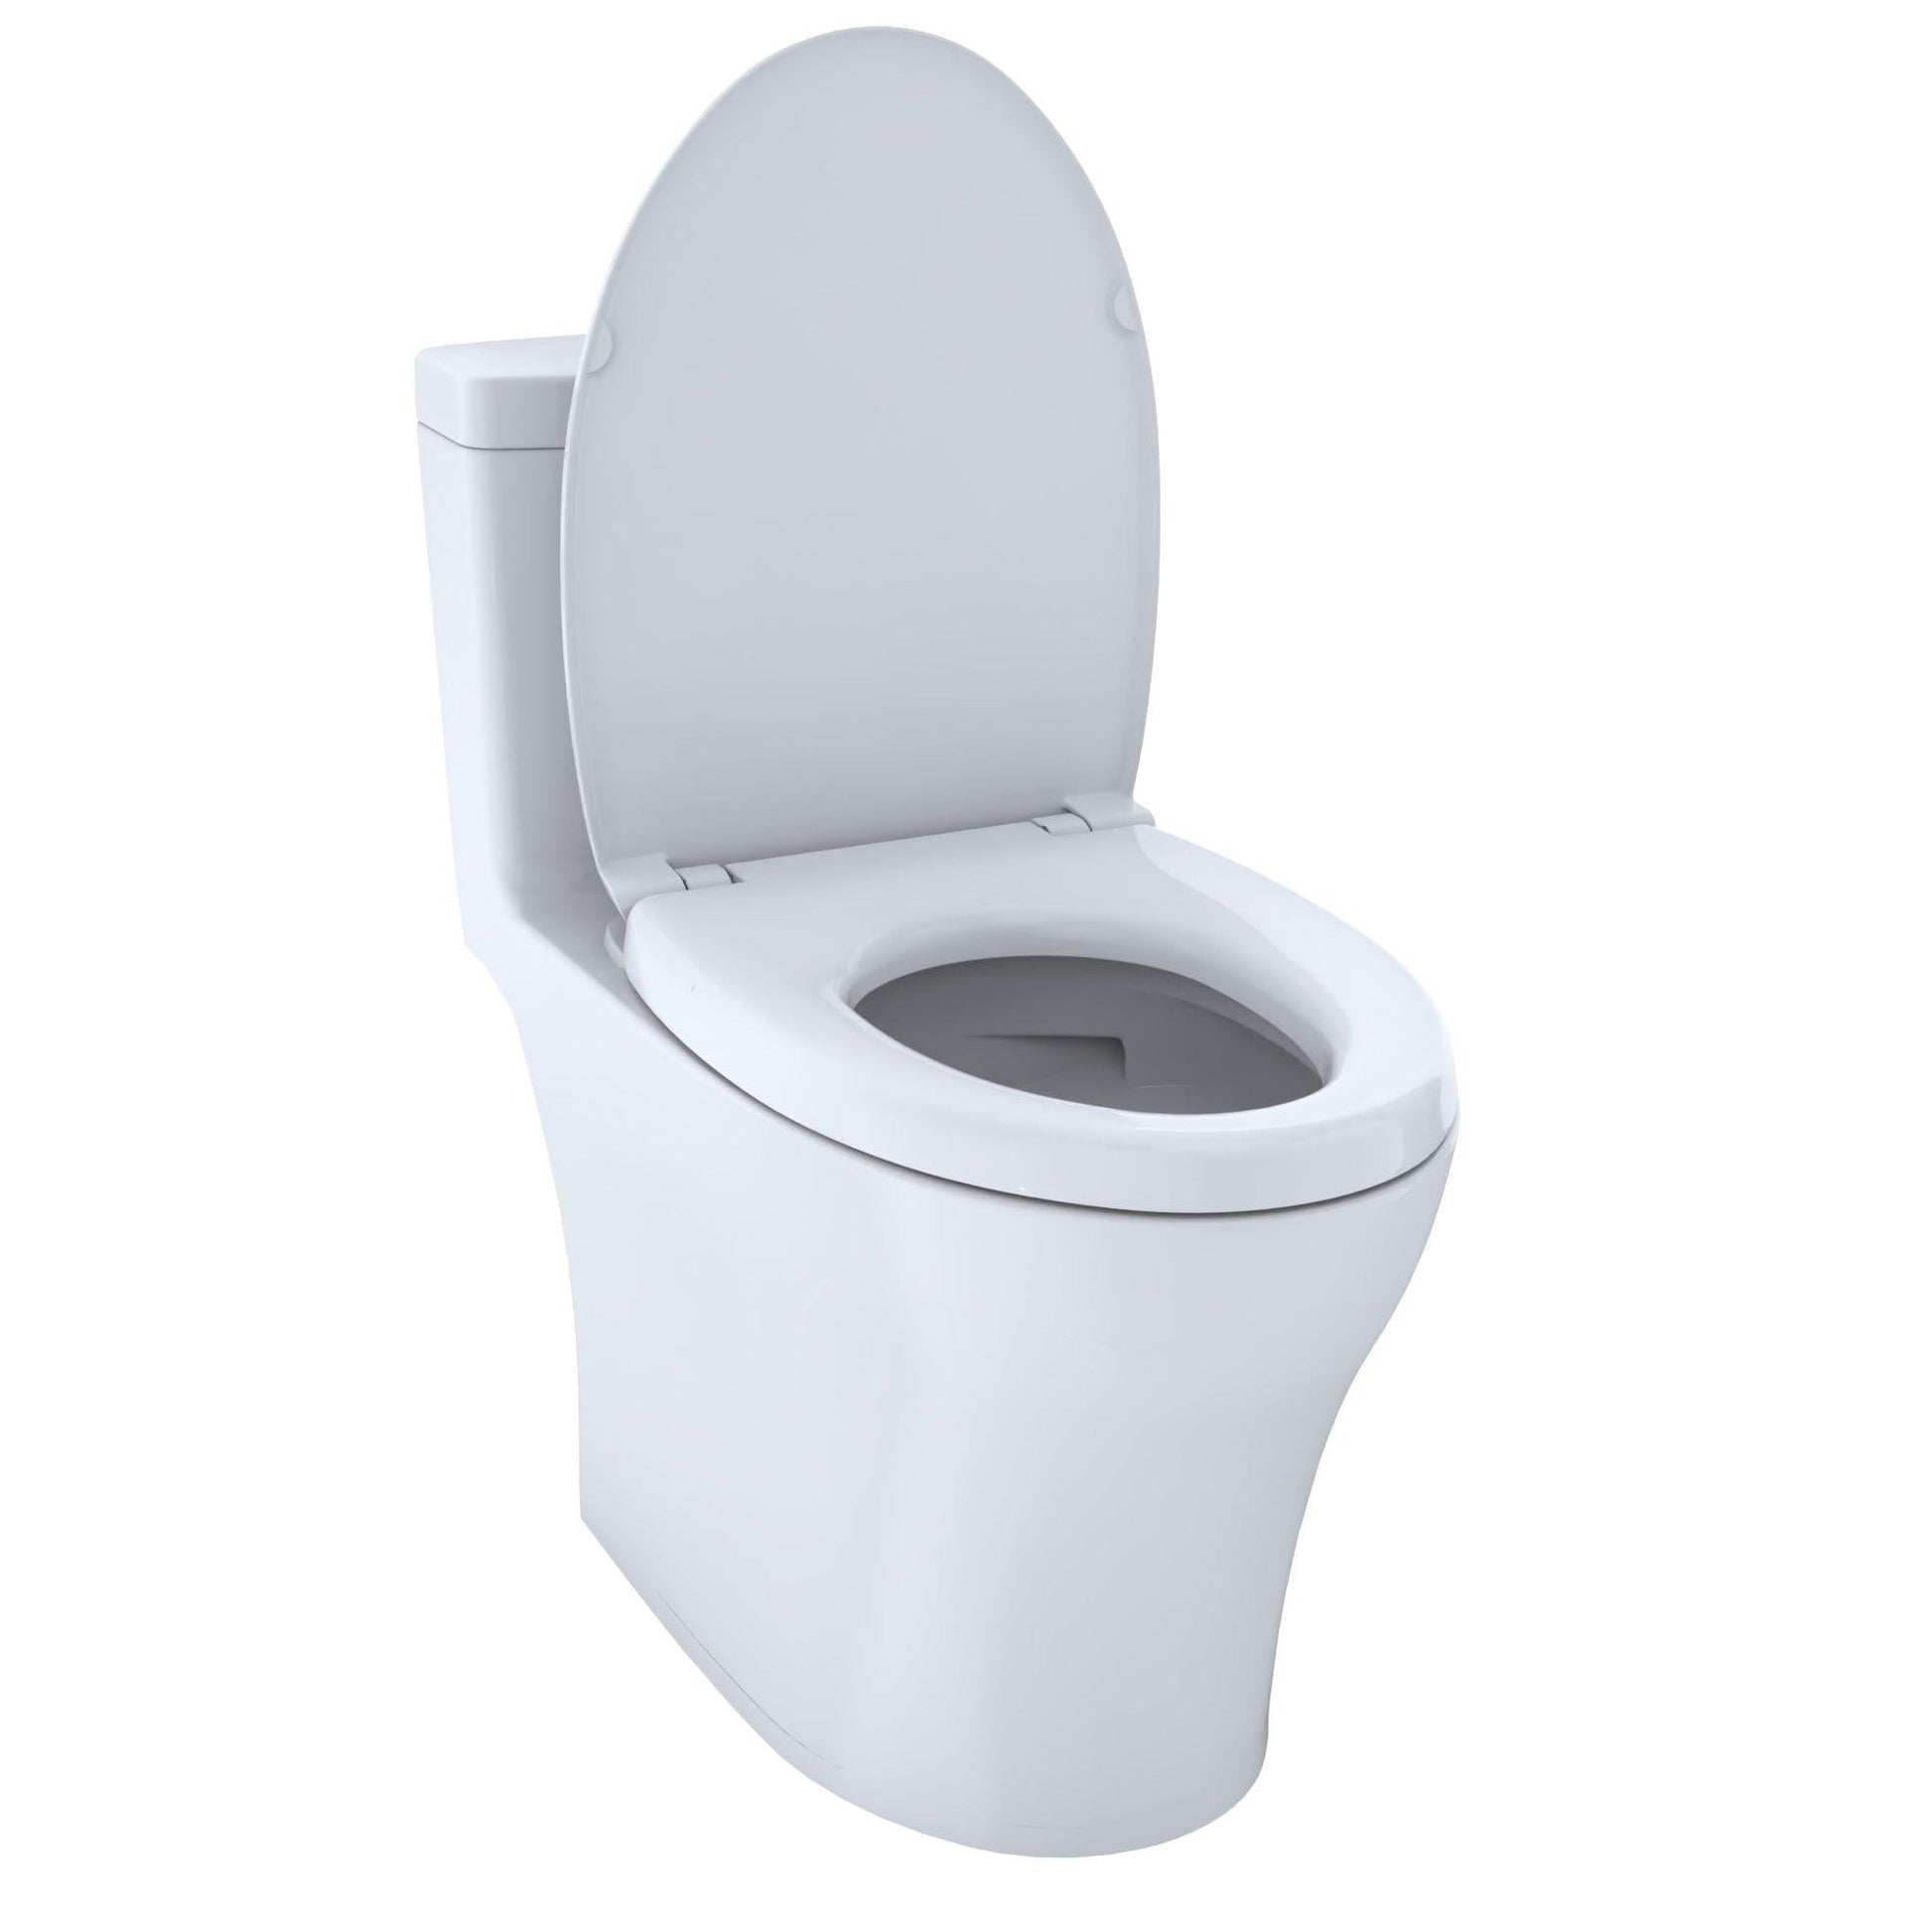 TOTO Aquia IV Cotton White One-Piece 0.8 GPF & 1.0 GPF Dual-Flush Elongated Toilet With WASHLET+ Connection - Seat Included